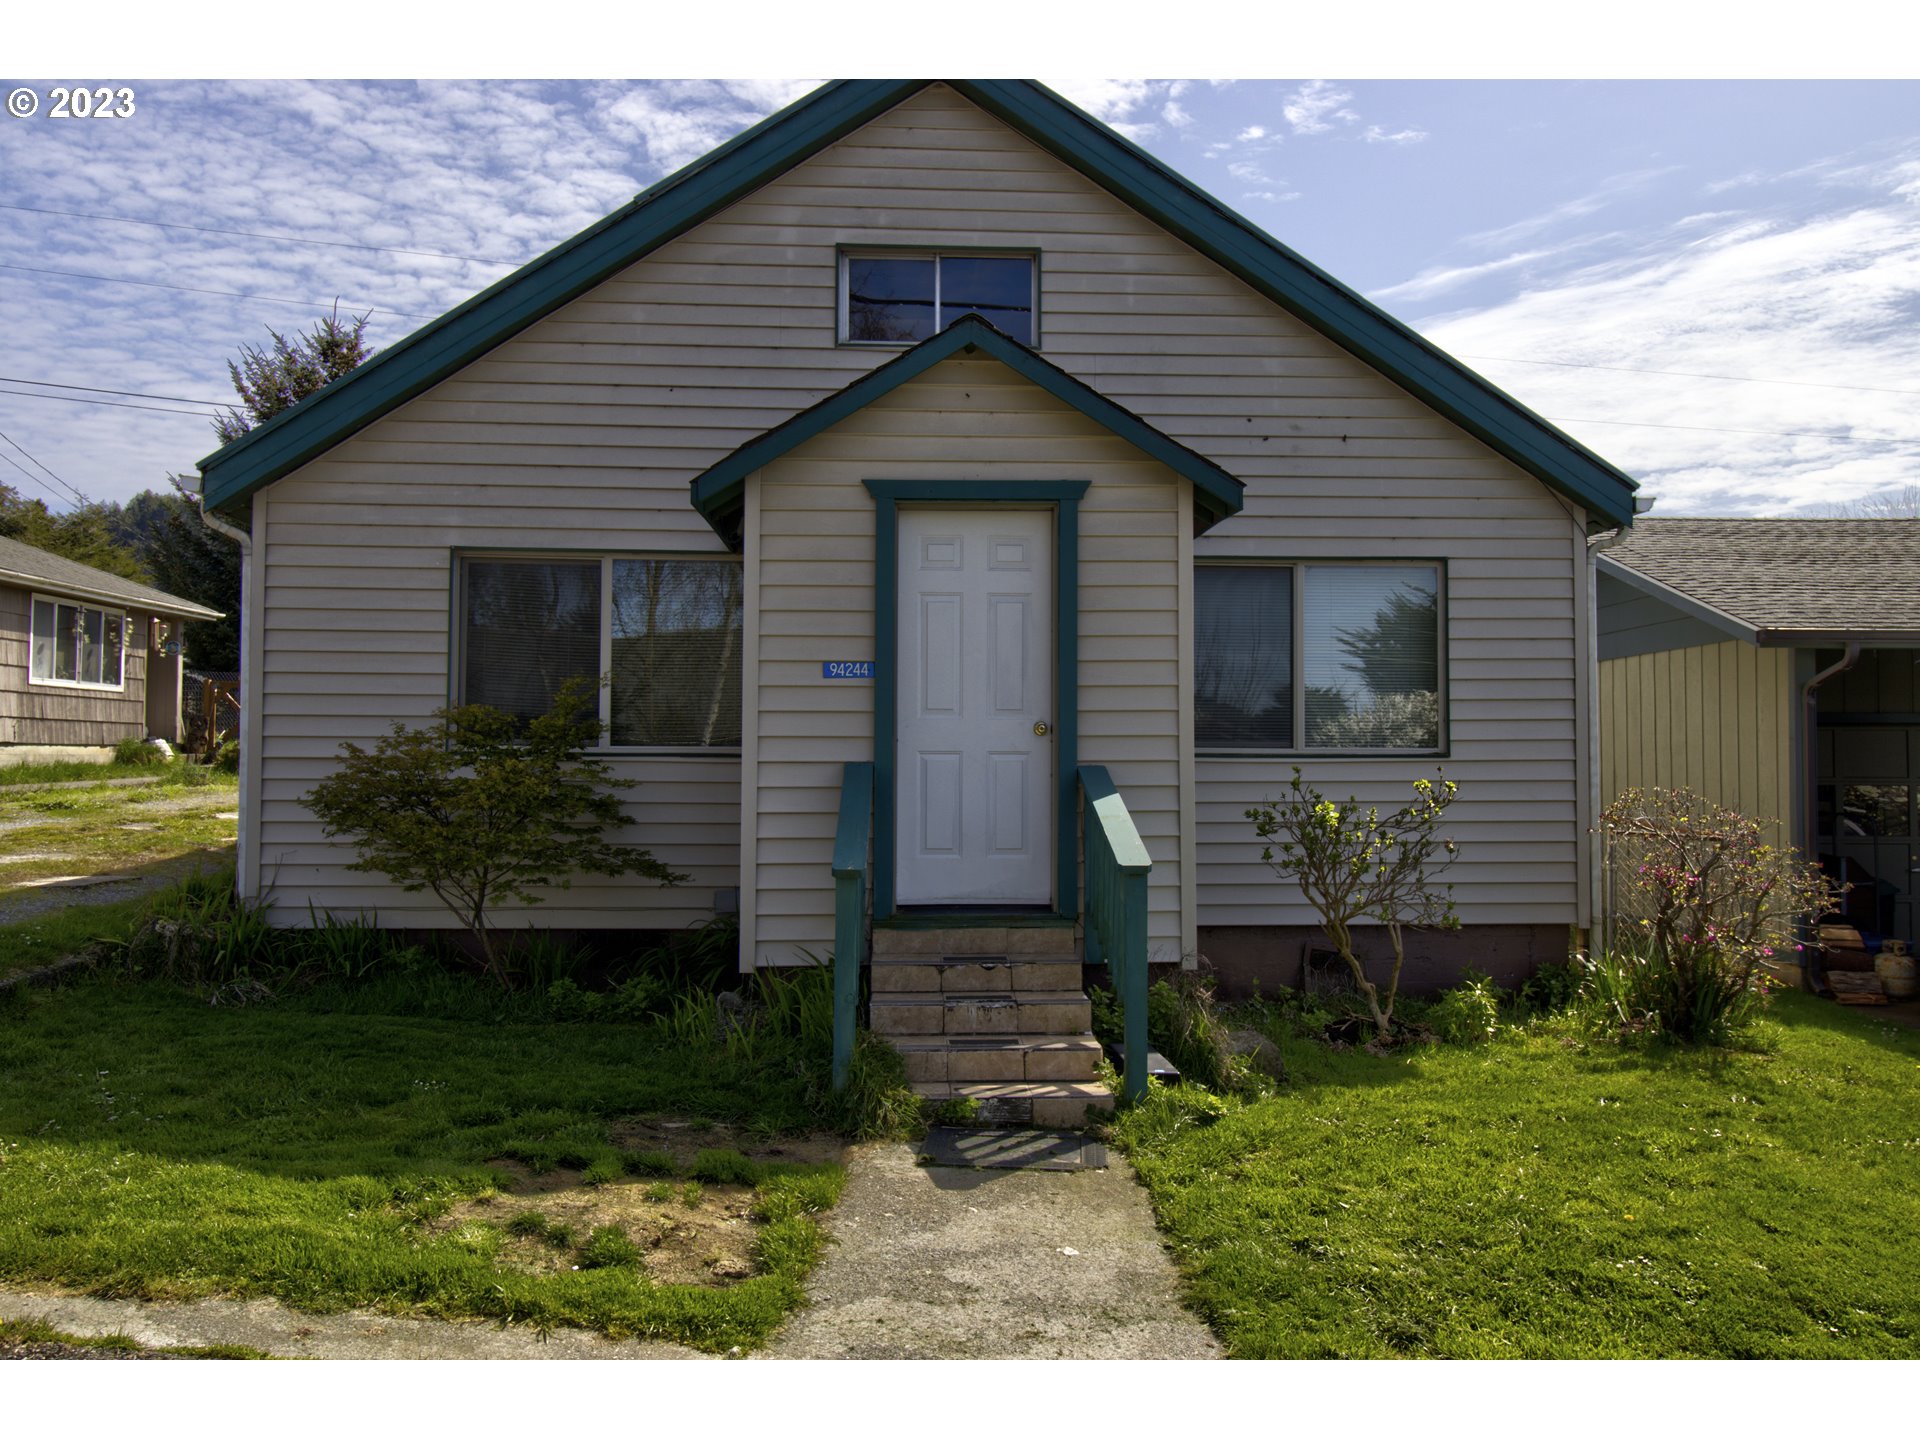 94244 2ND ST Gold Beach, Brookings Home Listings - Pacific Coastal Real Estate